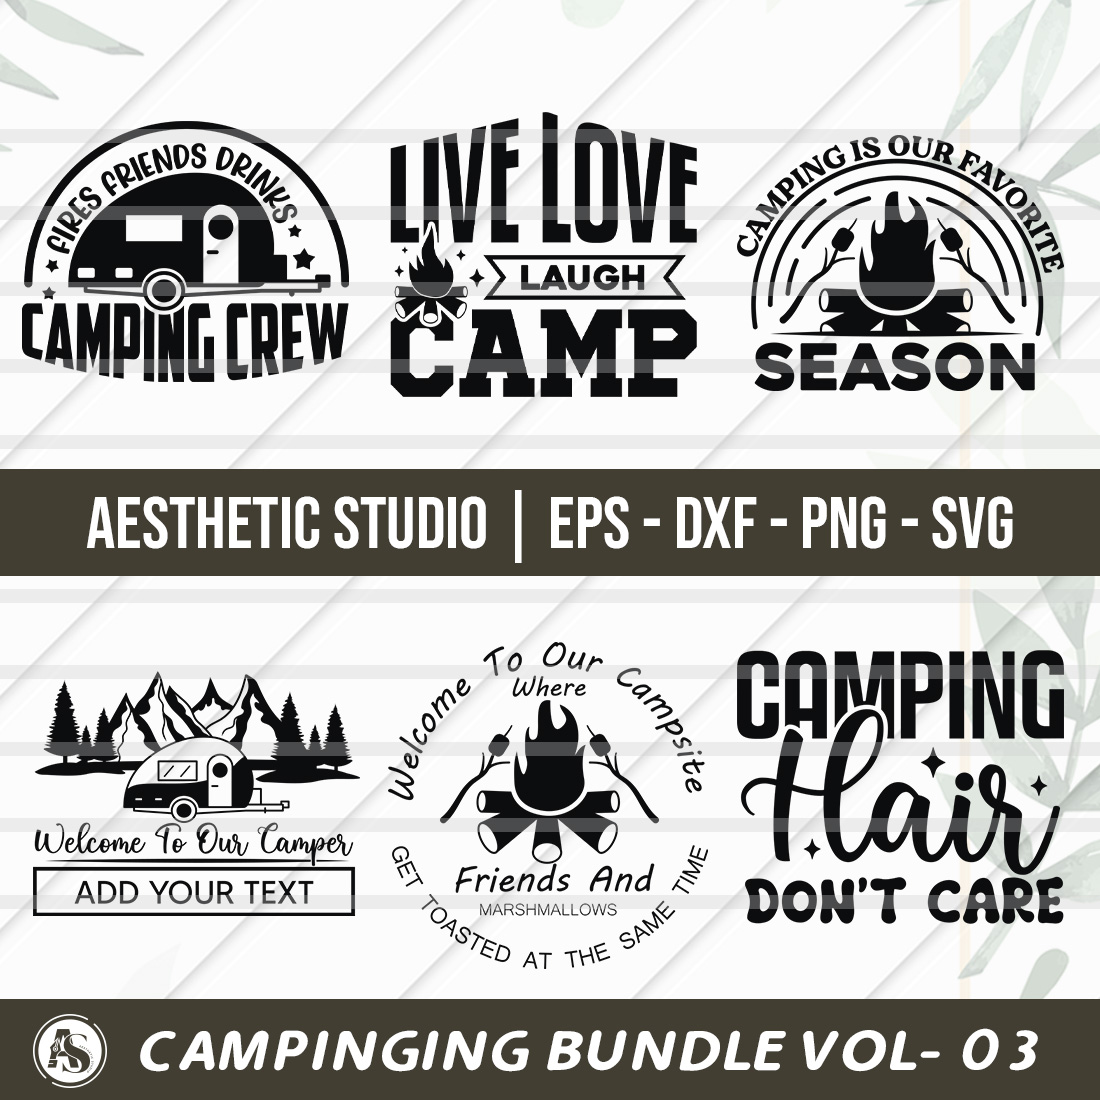 Camping Bundle Vol-03, Camping Hair Don\'t Care, Welcome Our Campe, Camping Is Our Favorite Season, Fries Friends Drinks Camping Crew, Live Love Laugh Camp, Camping Svg, SVG, Camping Quotes, Camping Bundle Design, Svg, Eps, Dxf, Png, Cut file cover image.